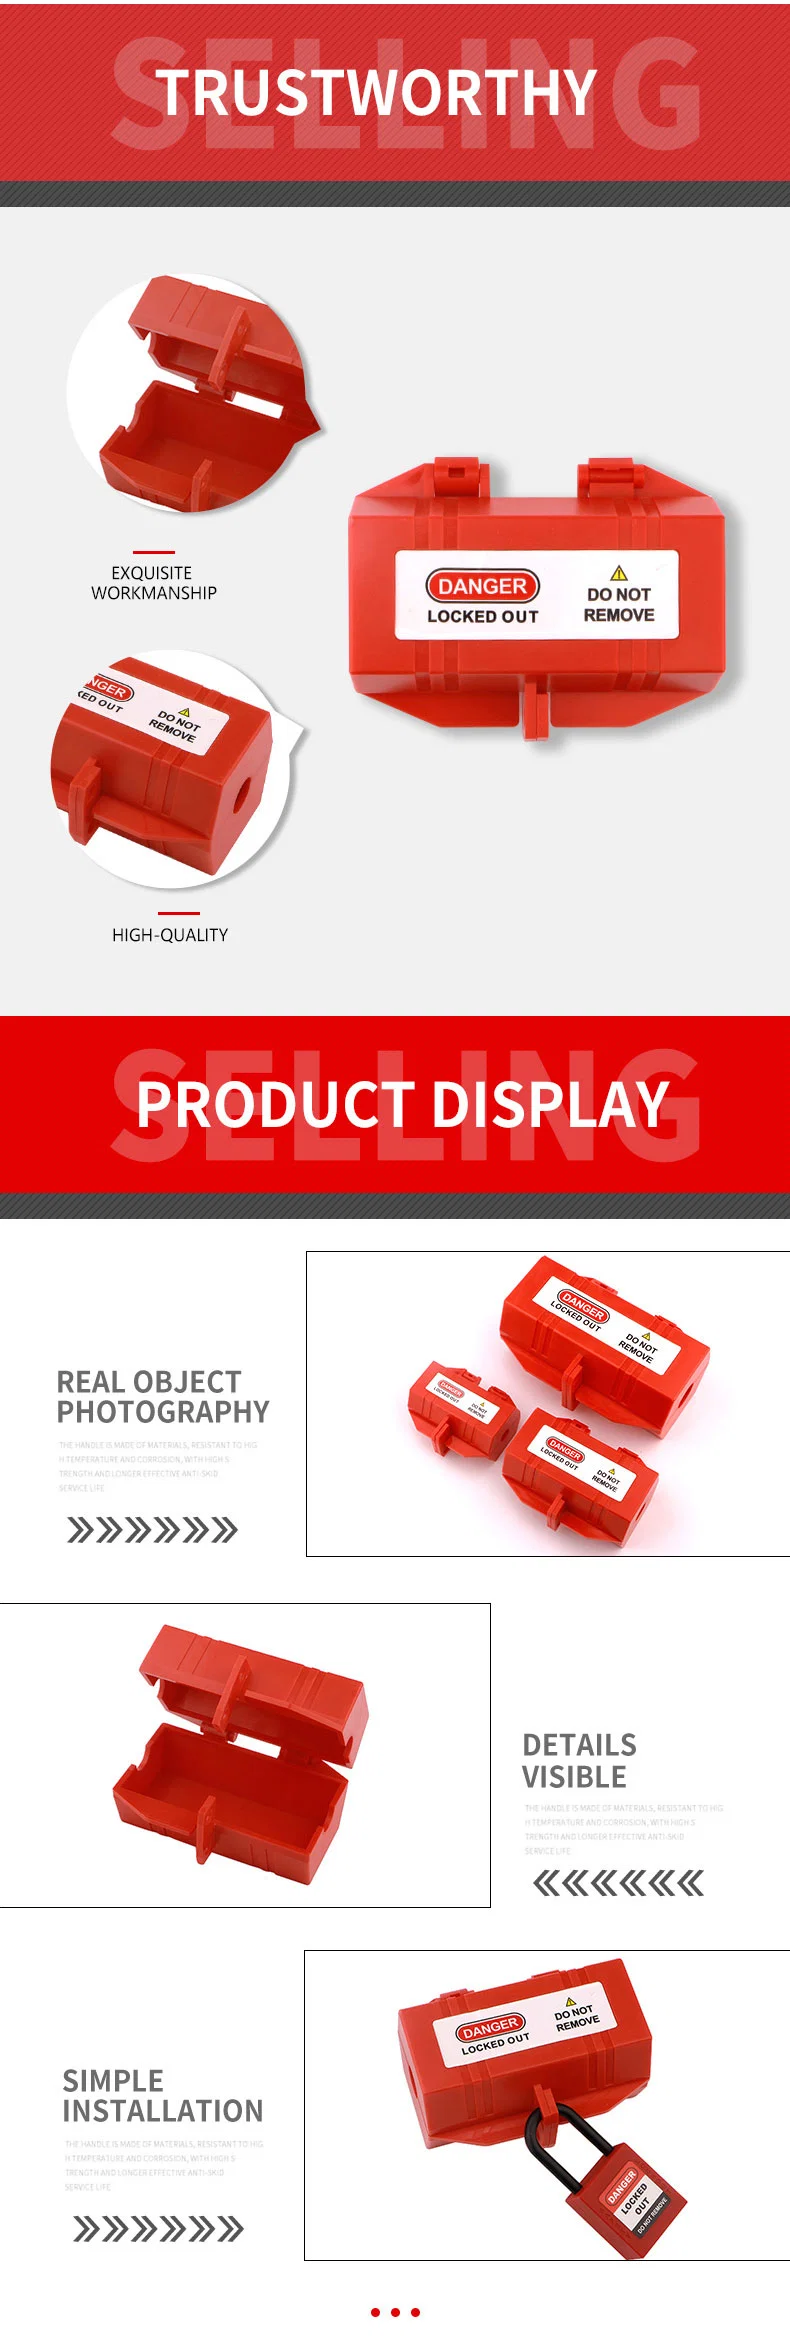 Mct01 Industry Durable Safe Pneumatic Plug Lockout Tagout Security Lock Loto Manufacturer